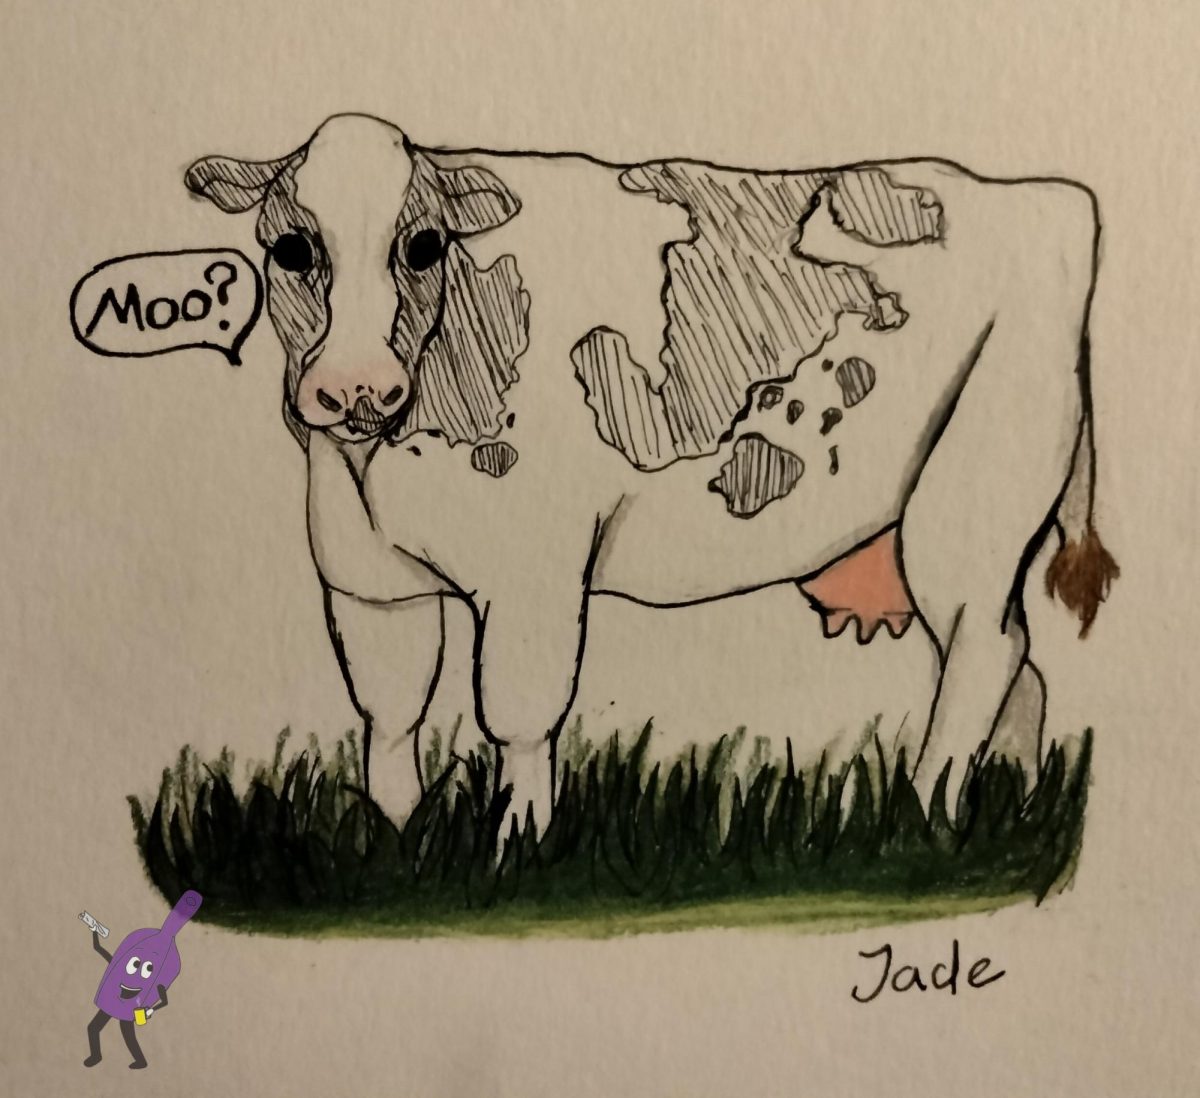 A cow questioning its mortality.